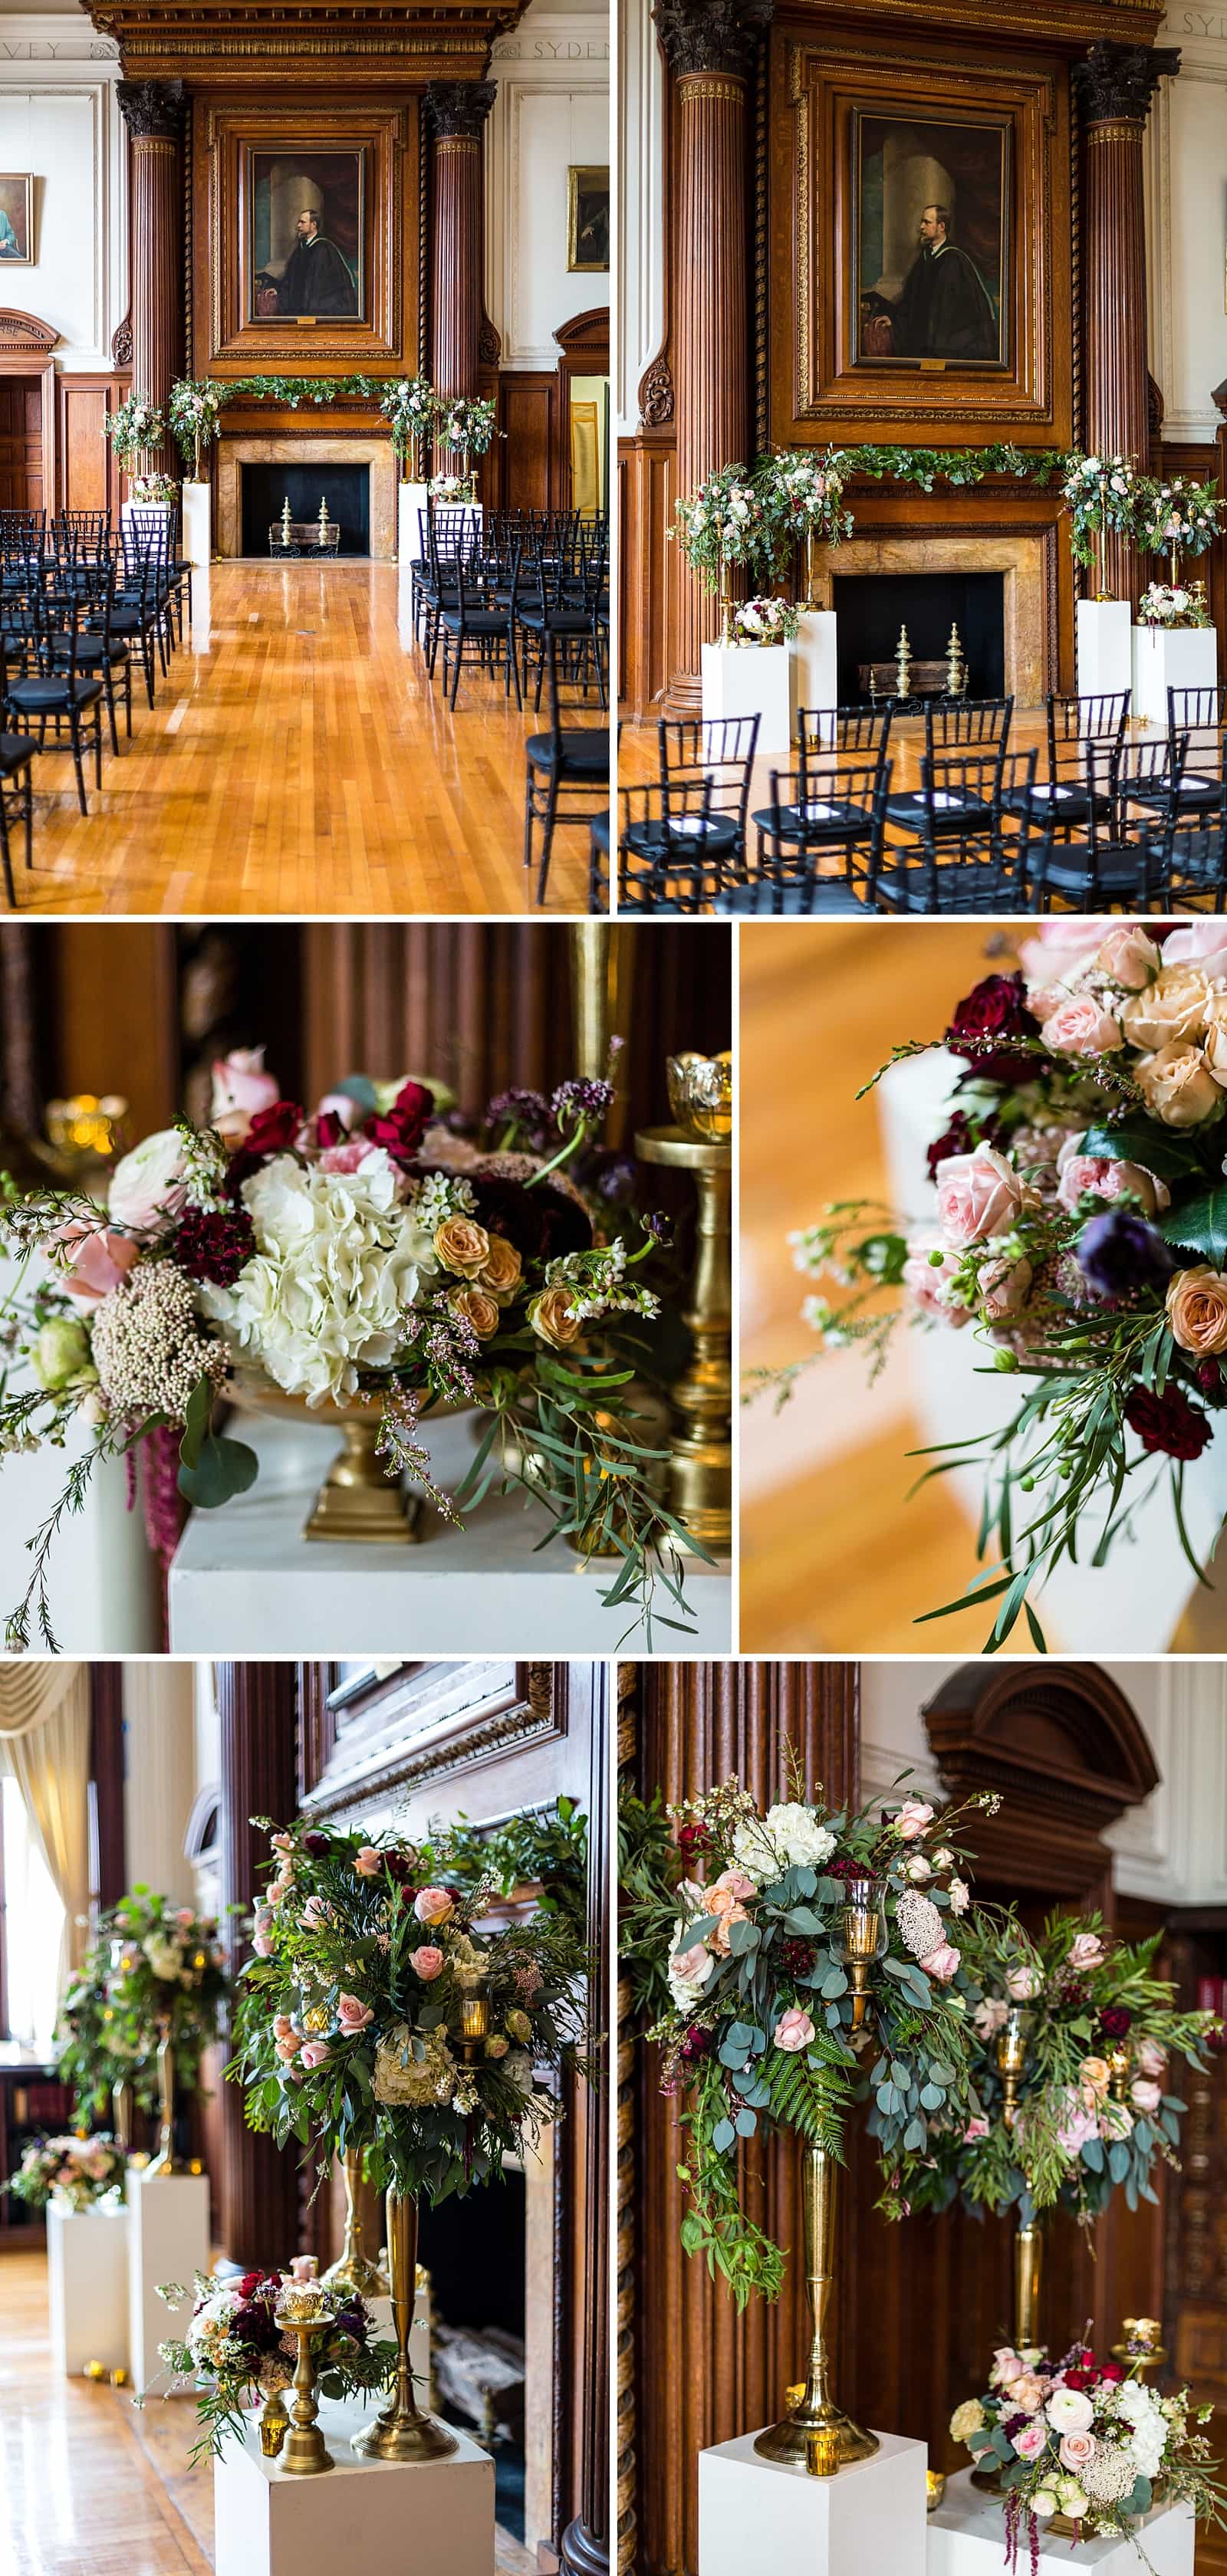 Wedding venue, aisle, flower and gold decorations details, College of Physicians wedding